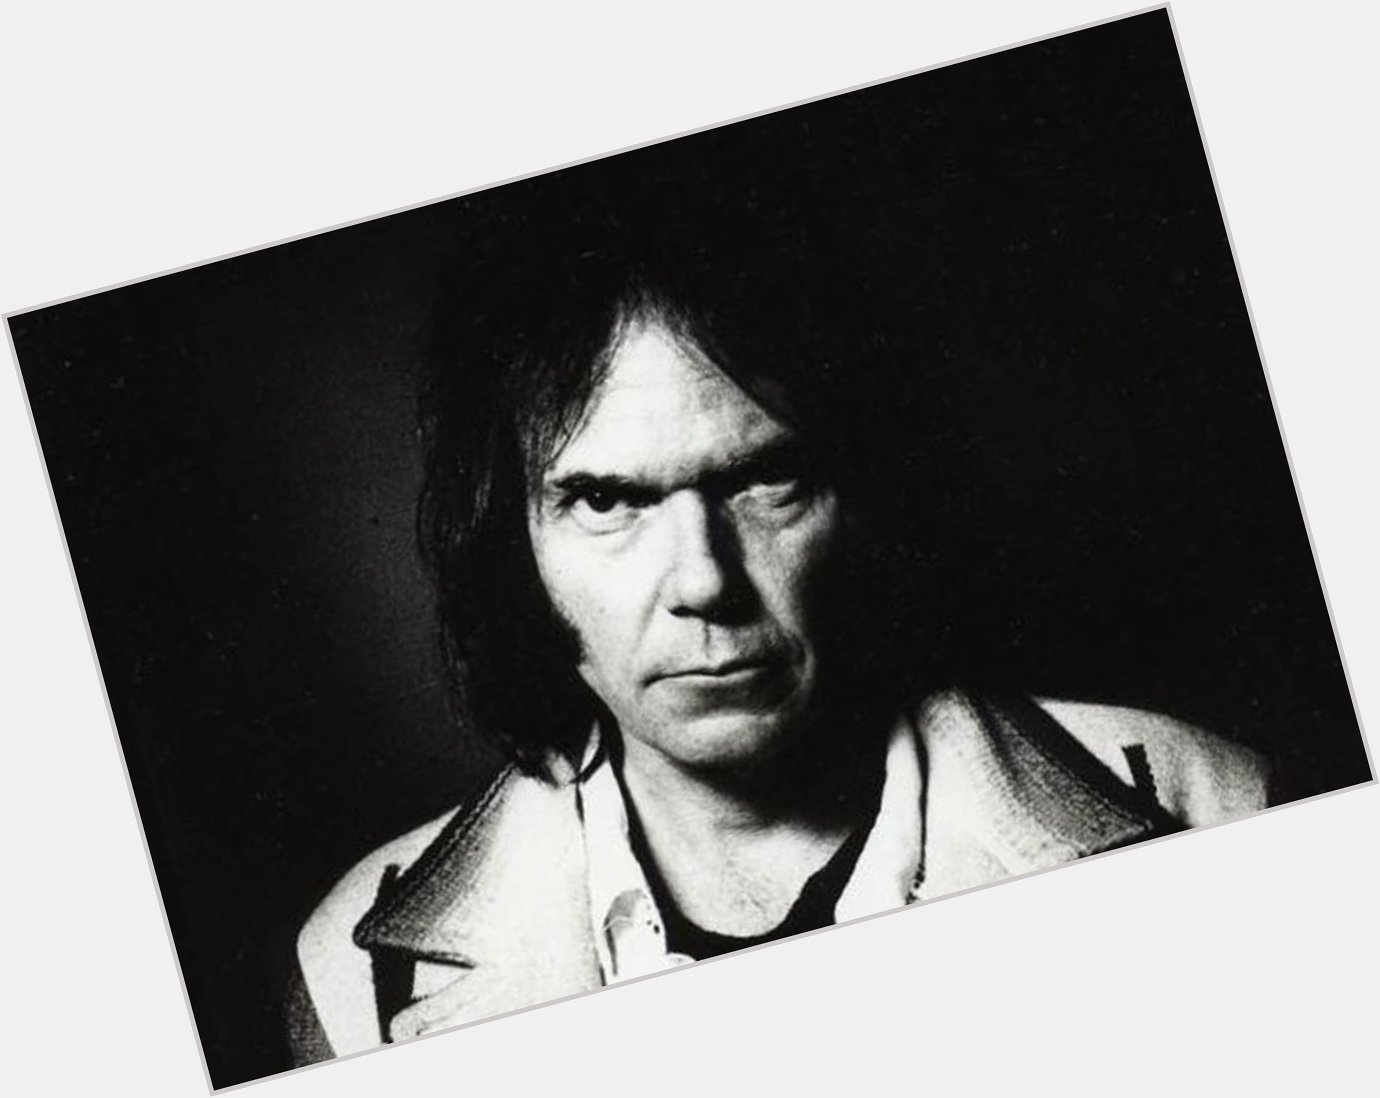 HAPPY BIRTHDAY, NEIL YOUNG! 